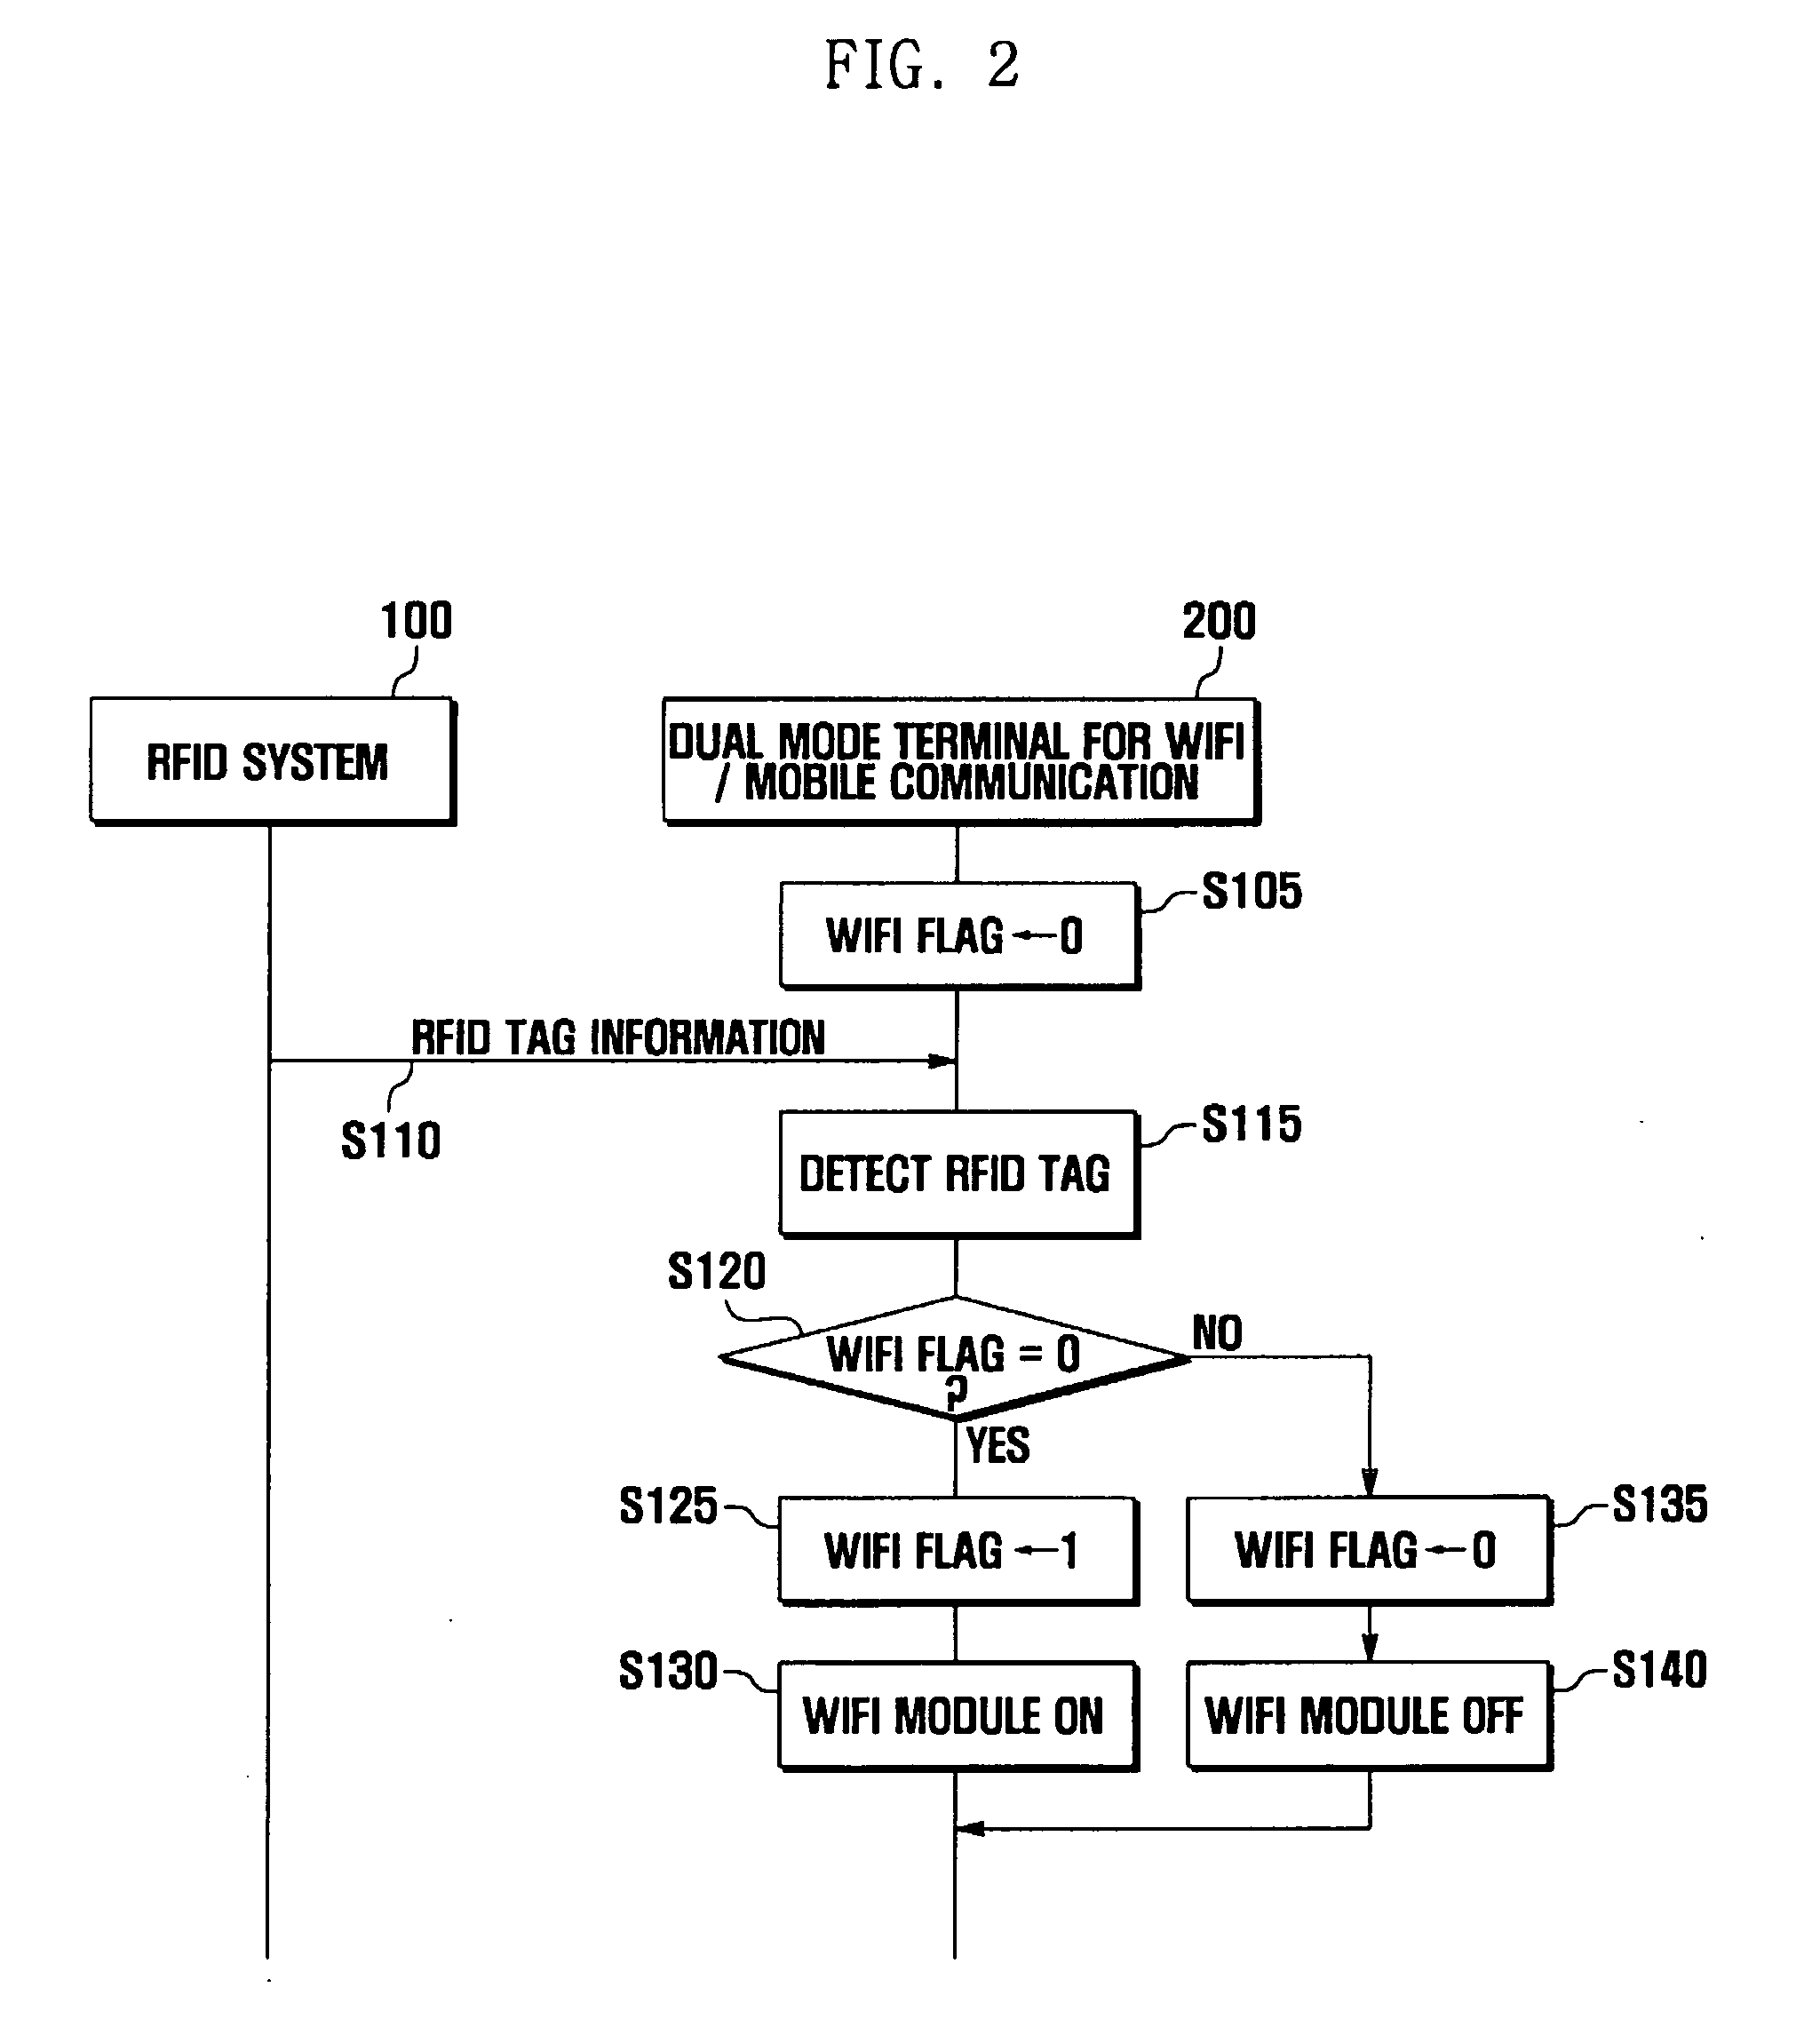 Apparatus and method for changing operation mode of dual mode terminal